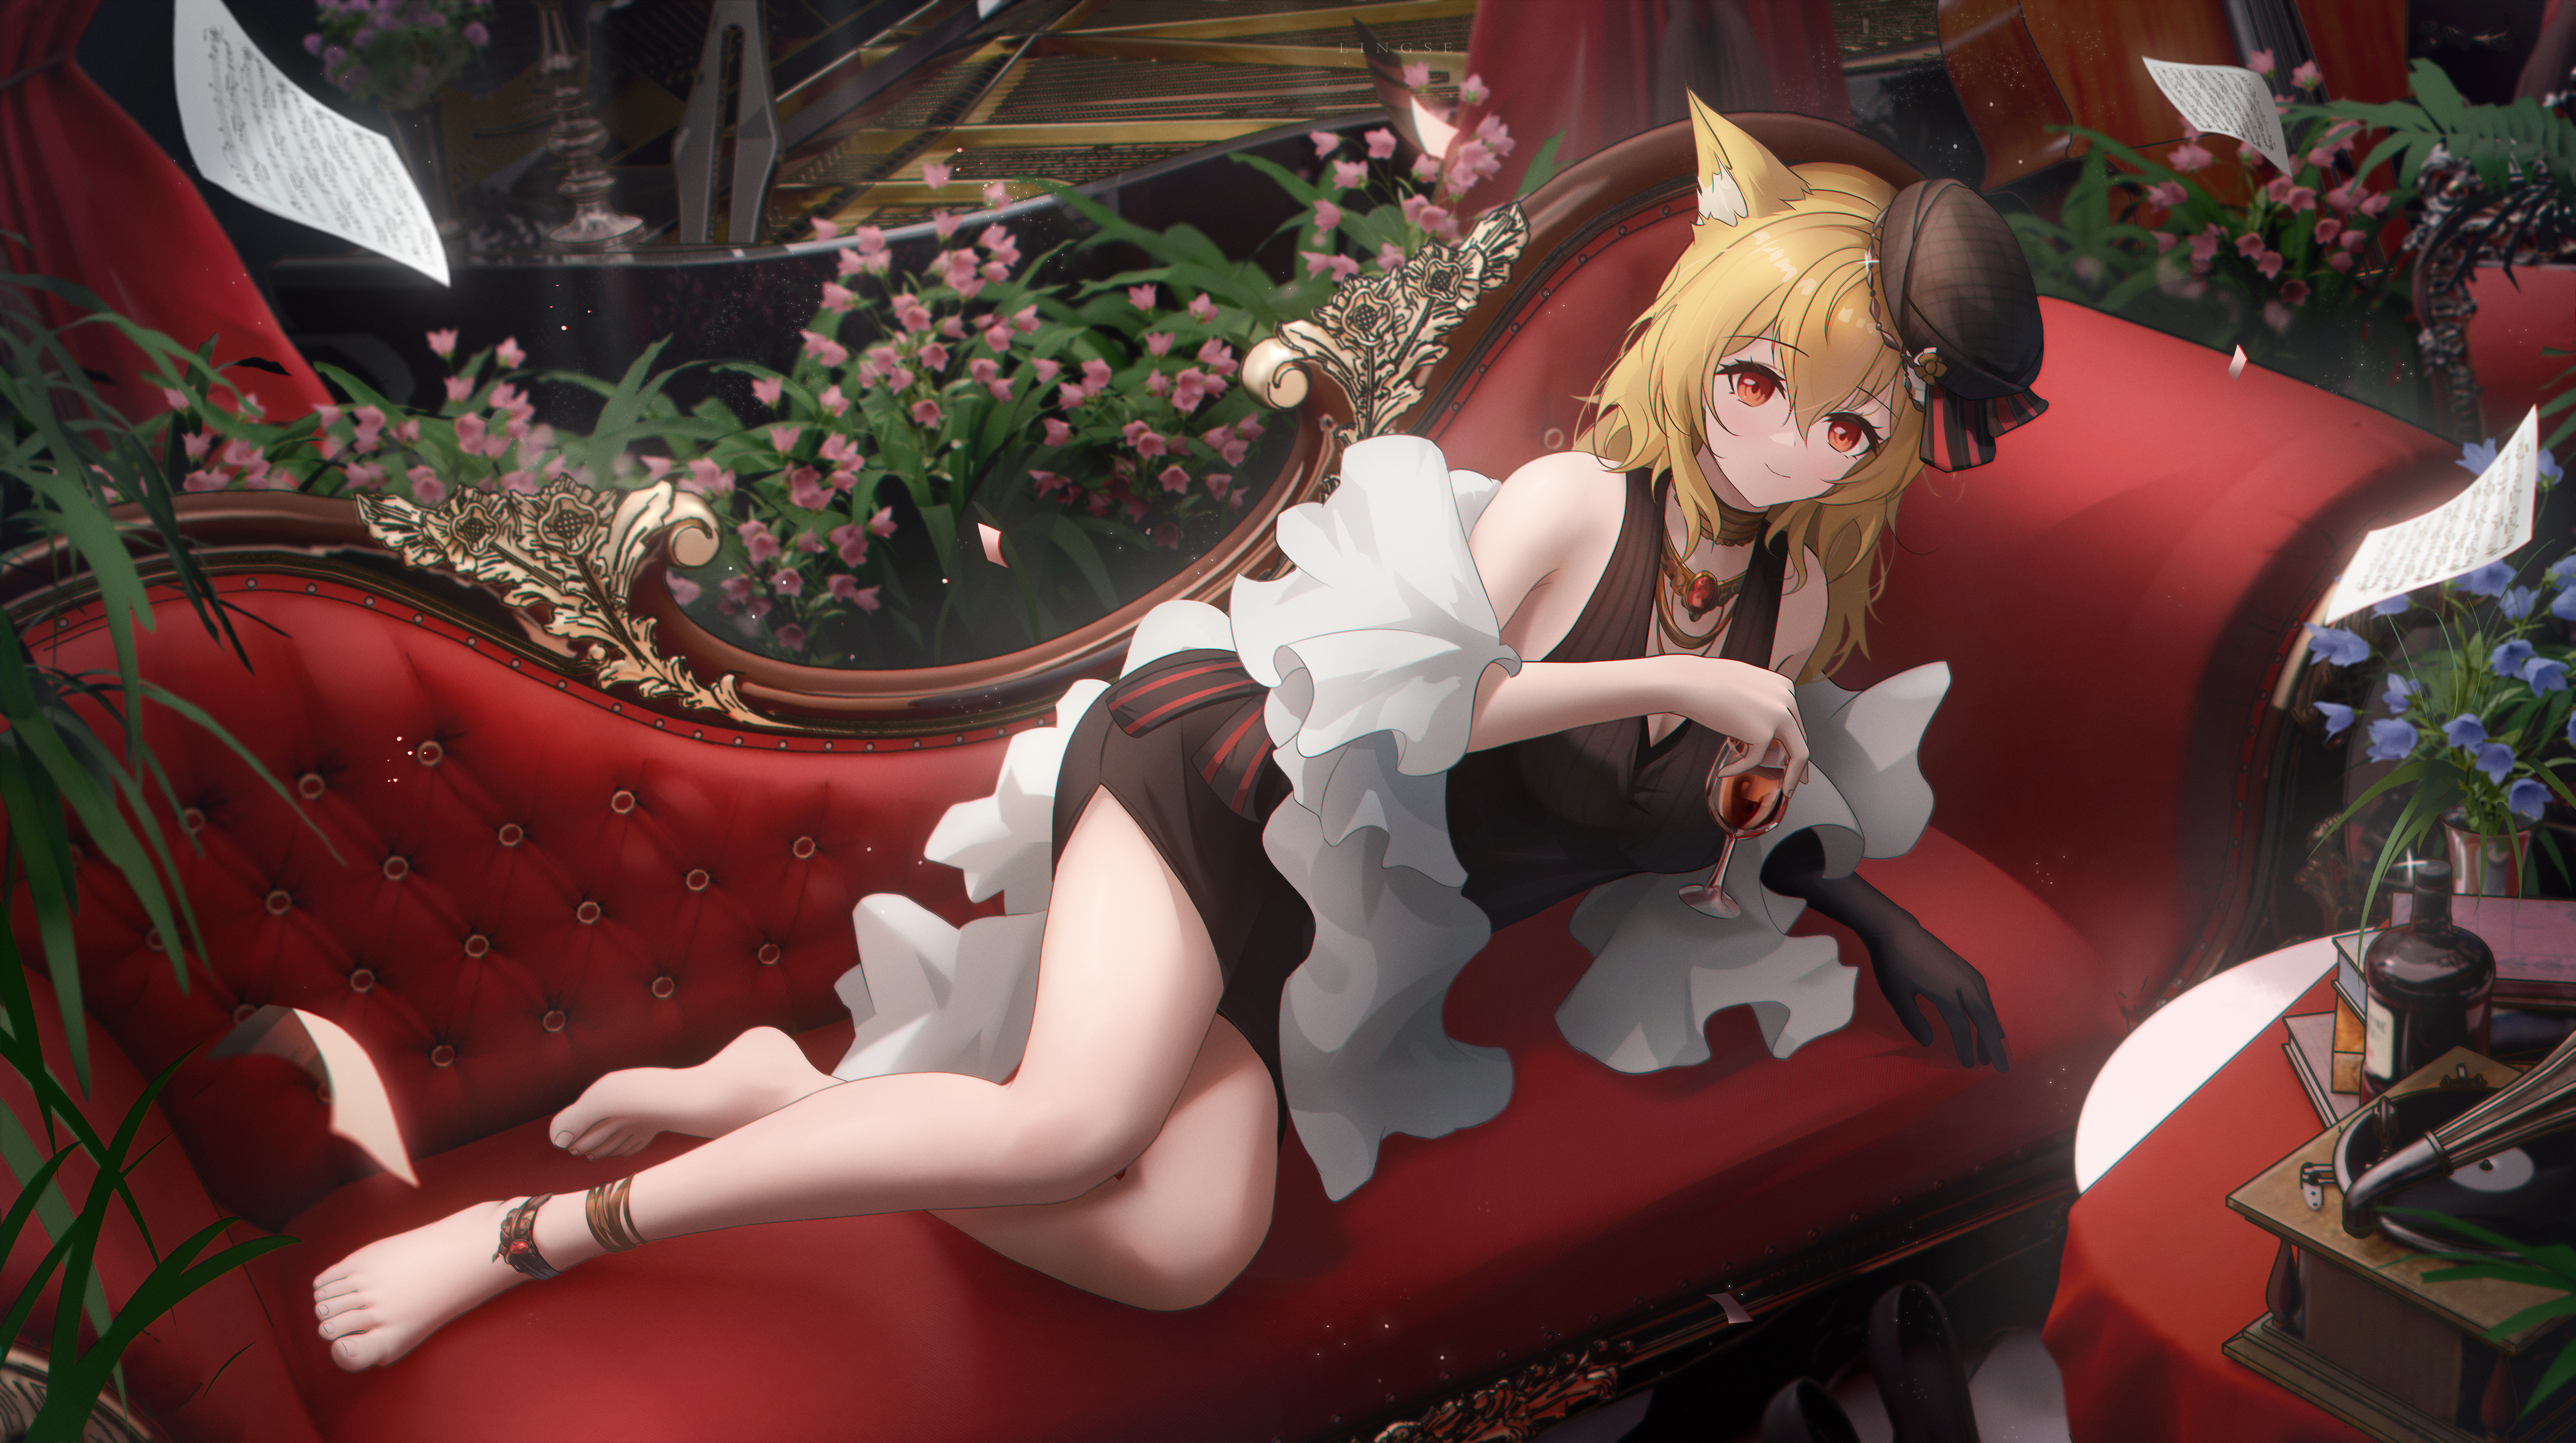 Anime Golden Hairs Flowers Red Eyes Anime Girls Hat Couch Wine Drink Lying On Side Paper Looking At  5000x2800